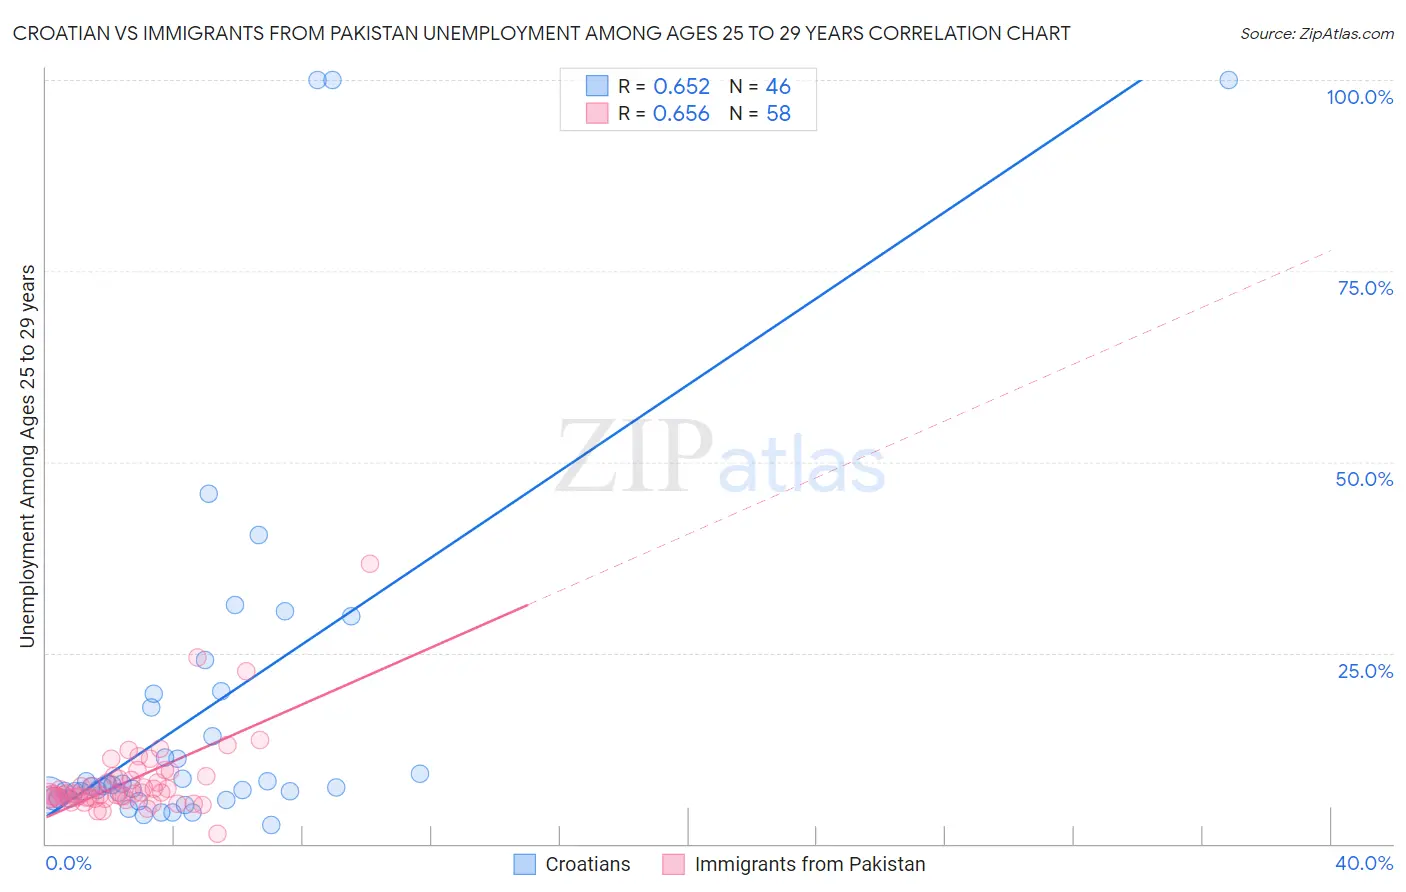 Croatian vs Immigrants from Pakistan Unemployment Among Ages 25 to 29 years